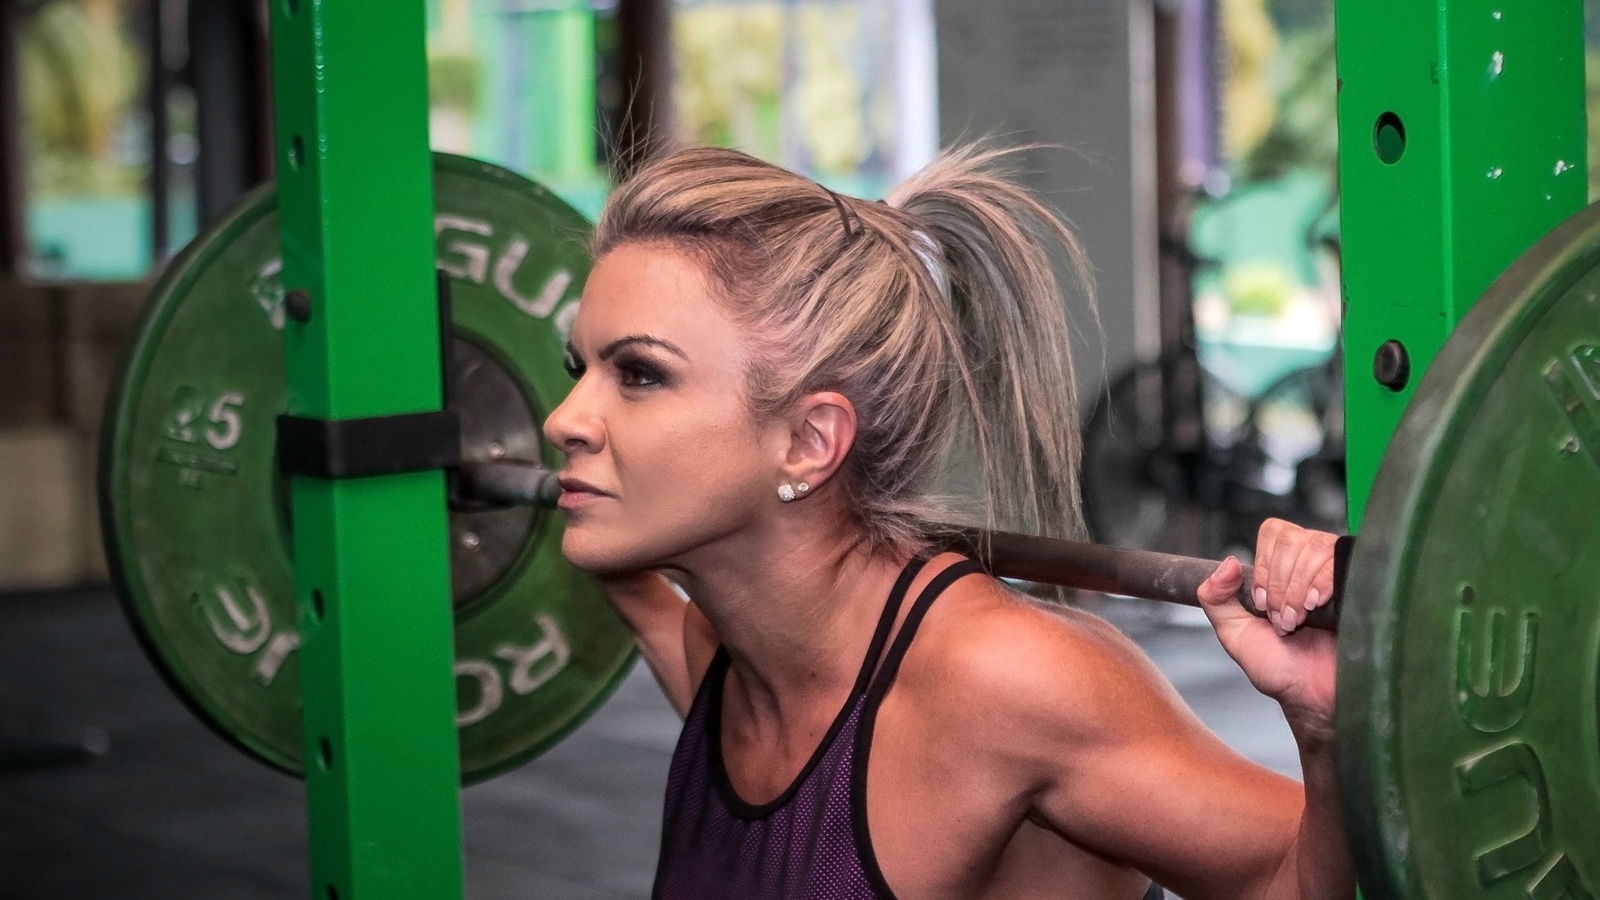 A woman preparing to lift weights